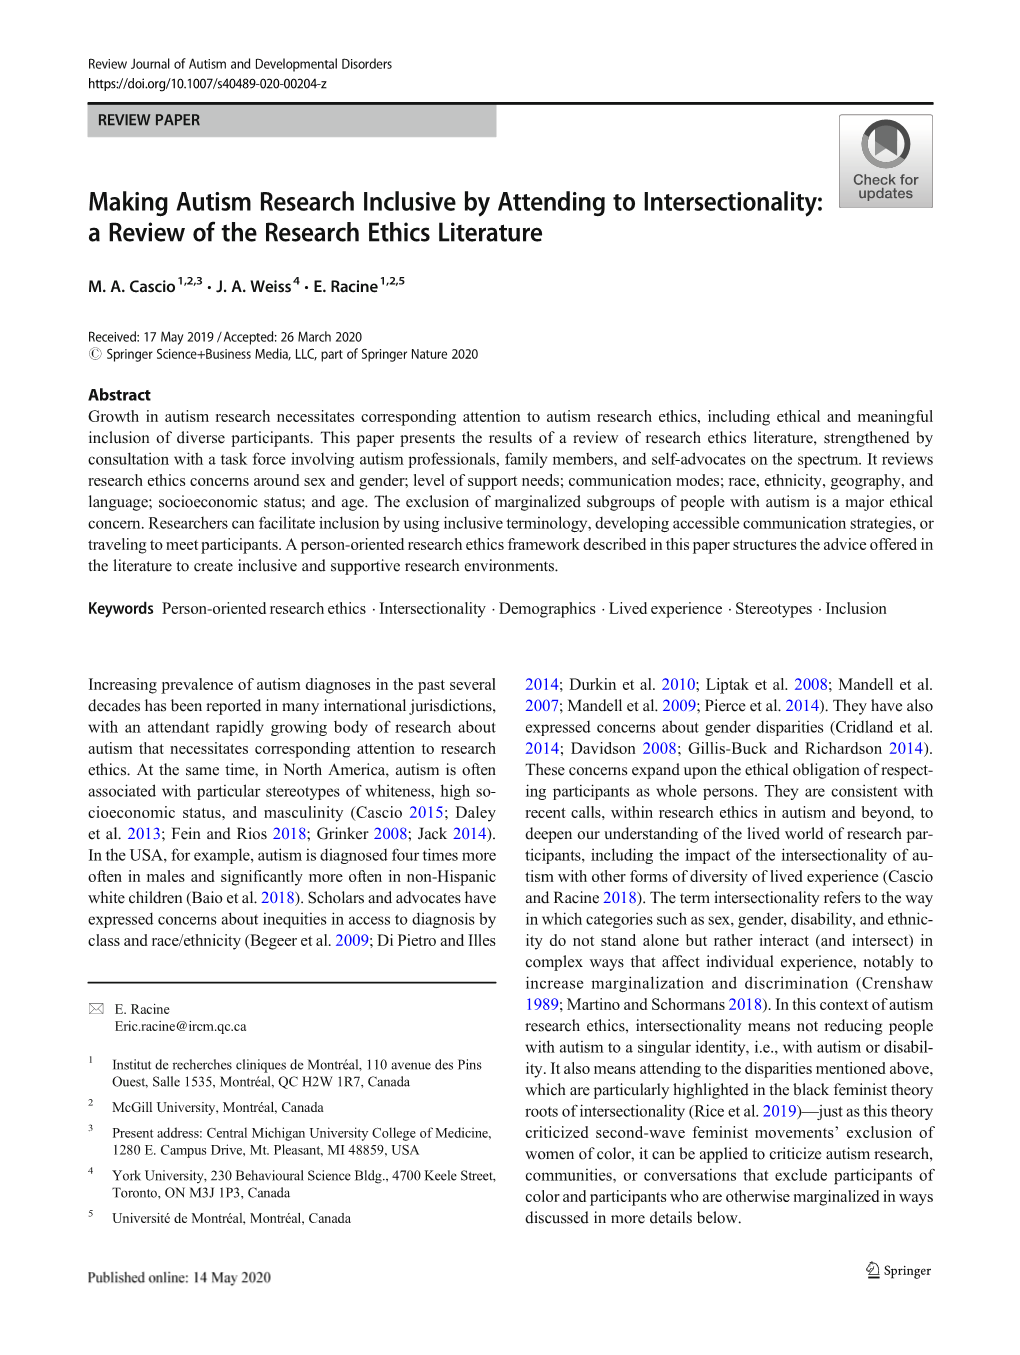 Making Autism Research Inclusive by Attending to Intersectionality: a Review of the Research Ethics Literature